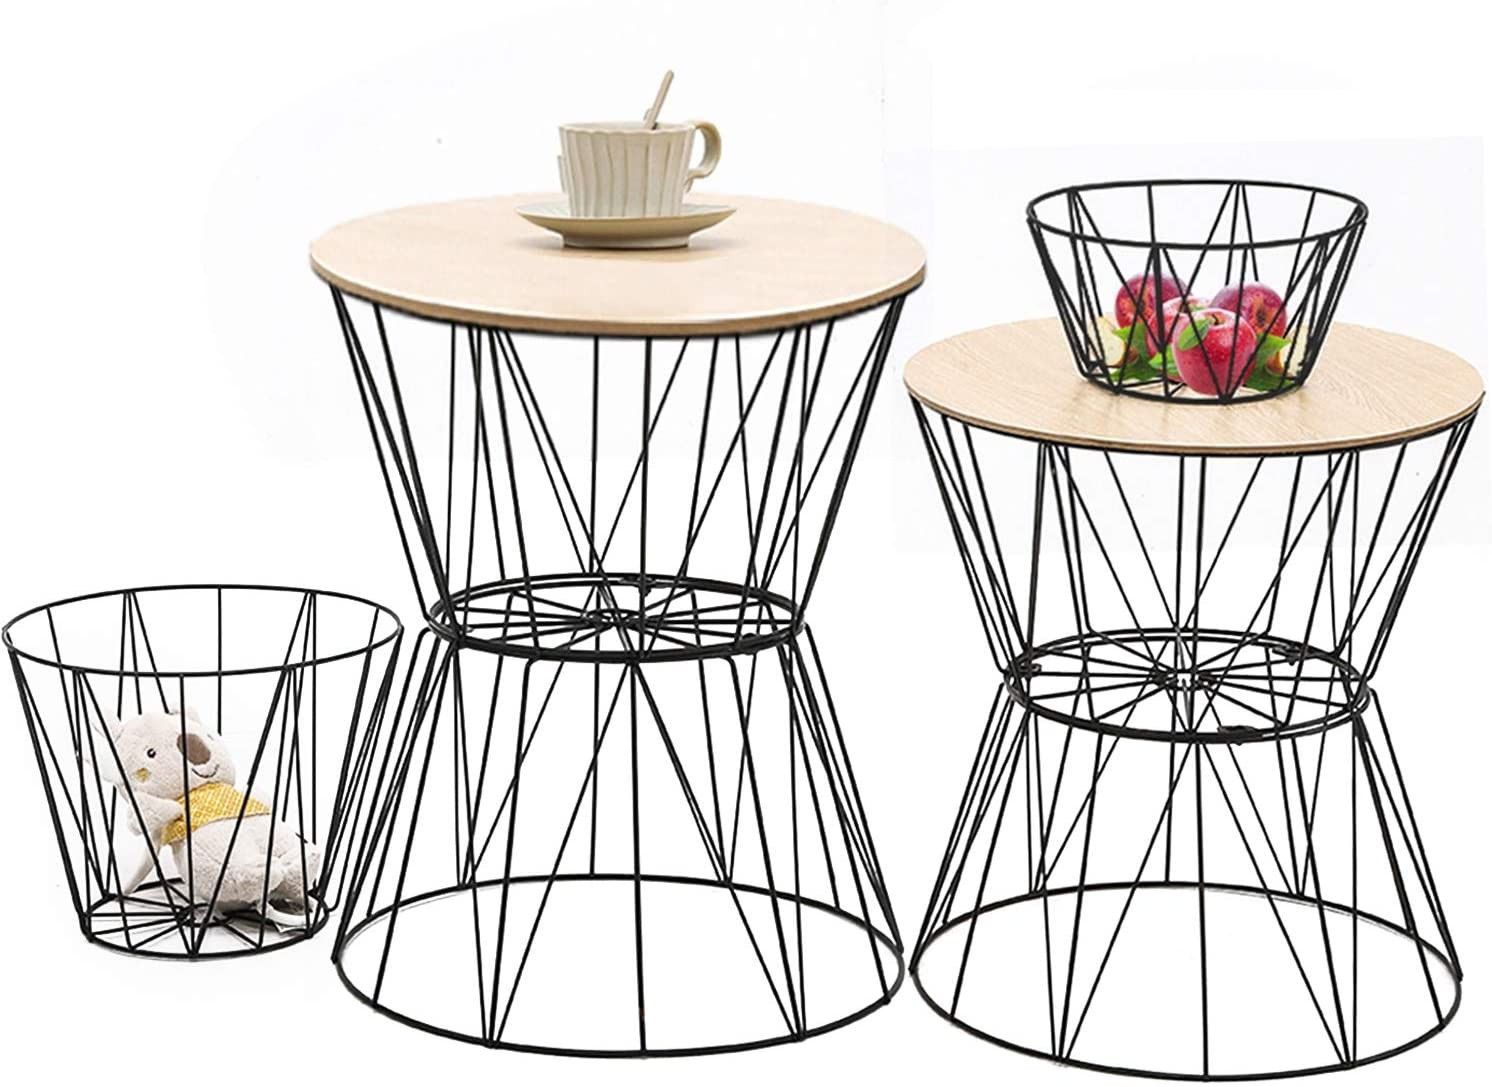 Round Based Set of 2-2 Extra Baskets, Decorative Storage for Living Room